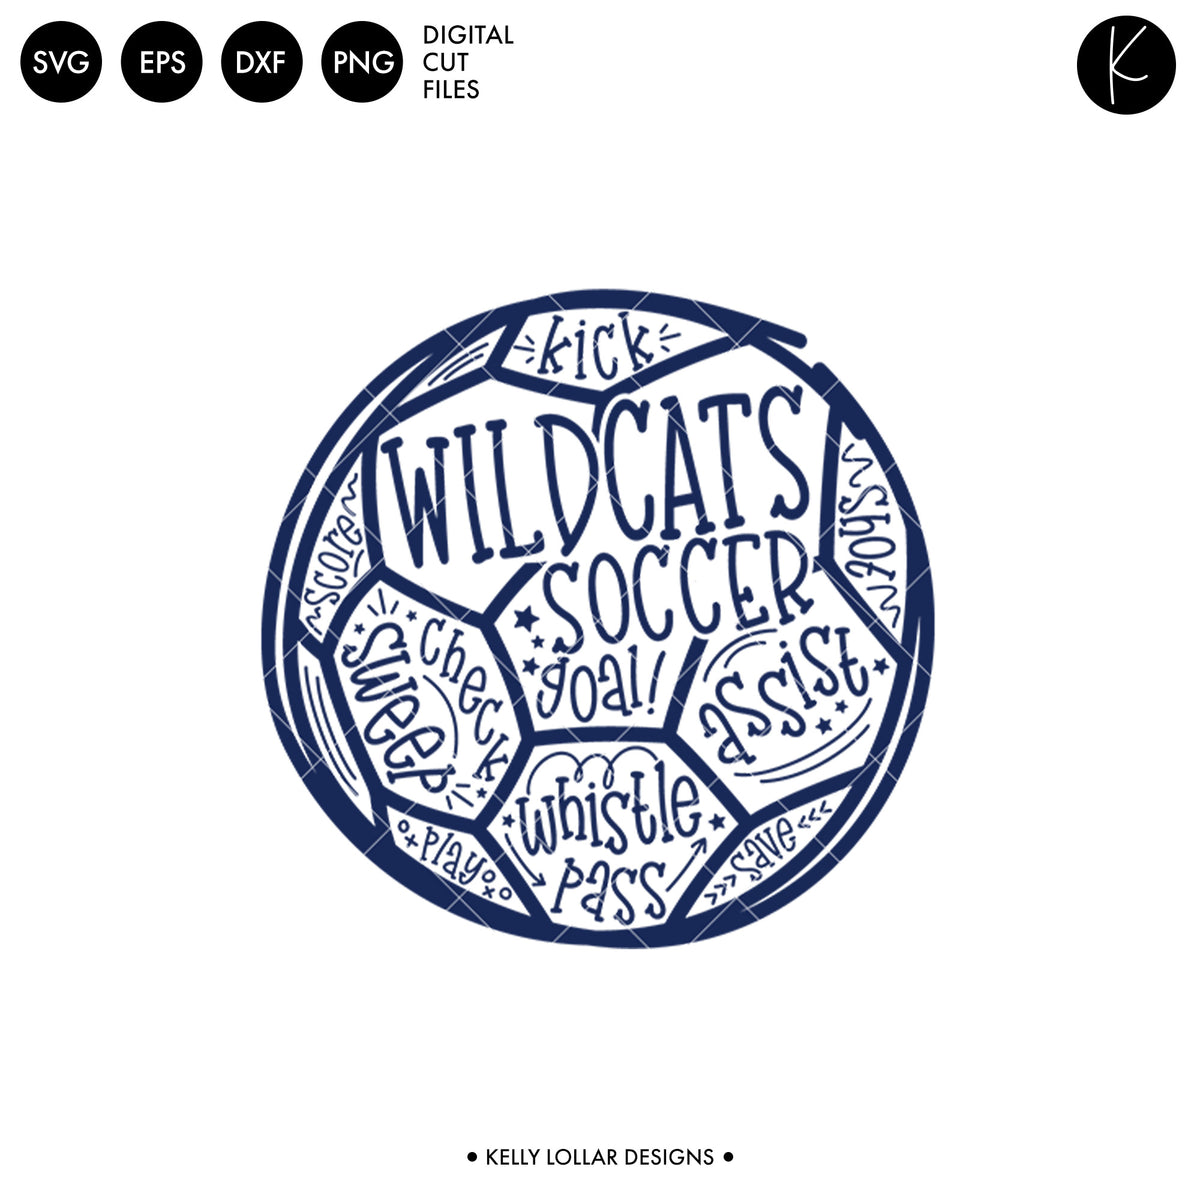 Wildcats Soccer and Football Bundle | SVG DXF EPS PNG Cut Files